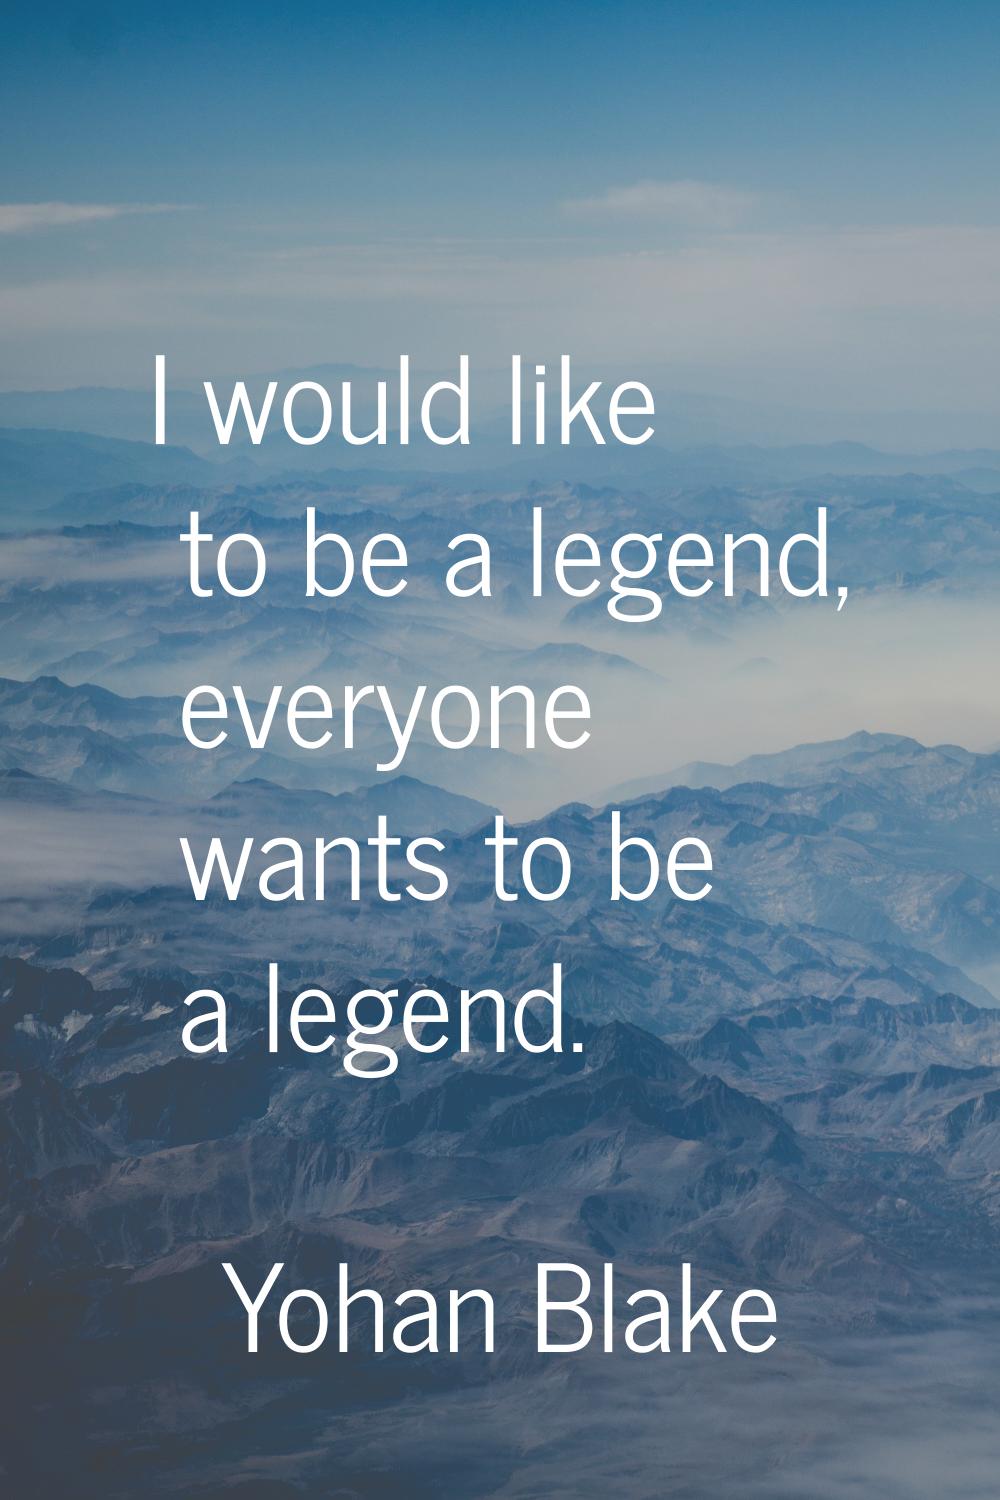 I would like to be a legend, everyone wants to be a legend.